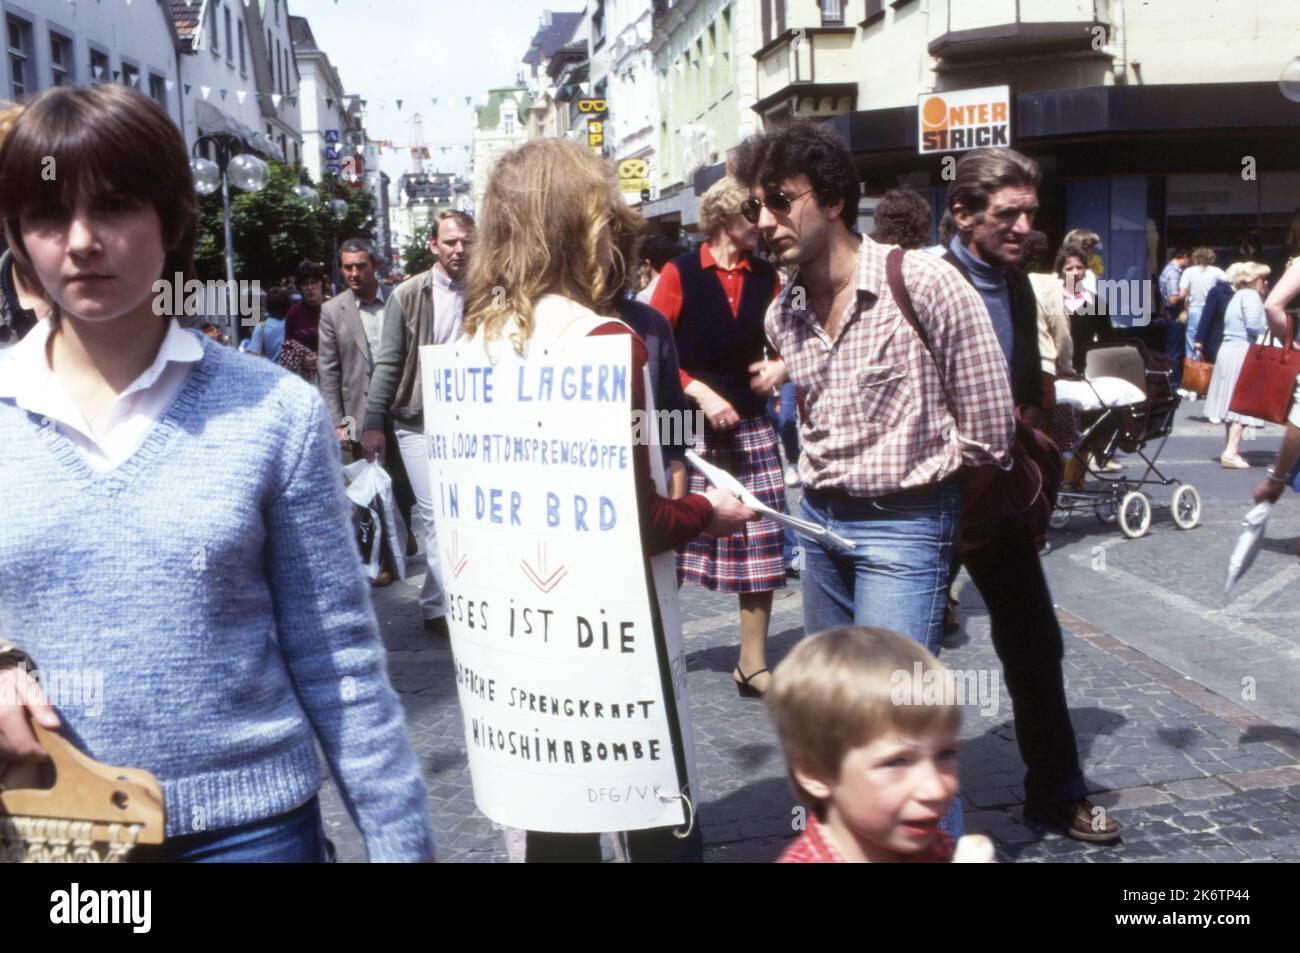 Ruhr area. DFG/VK (pacifists) advertisement in a pedestrian zone ca. 1981 Stock Photo